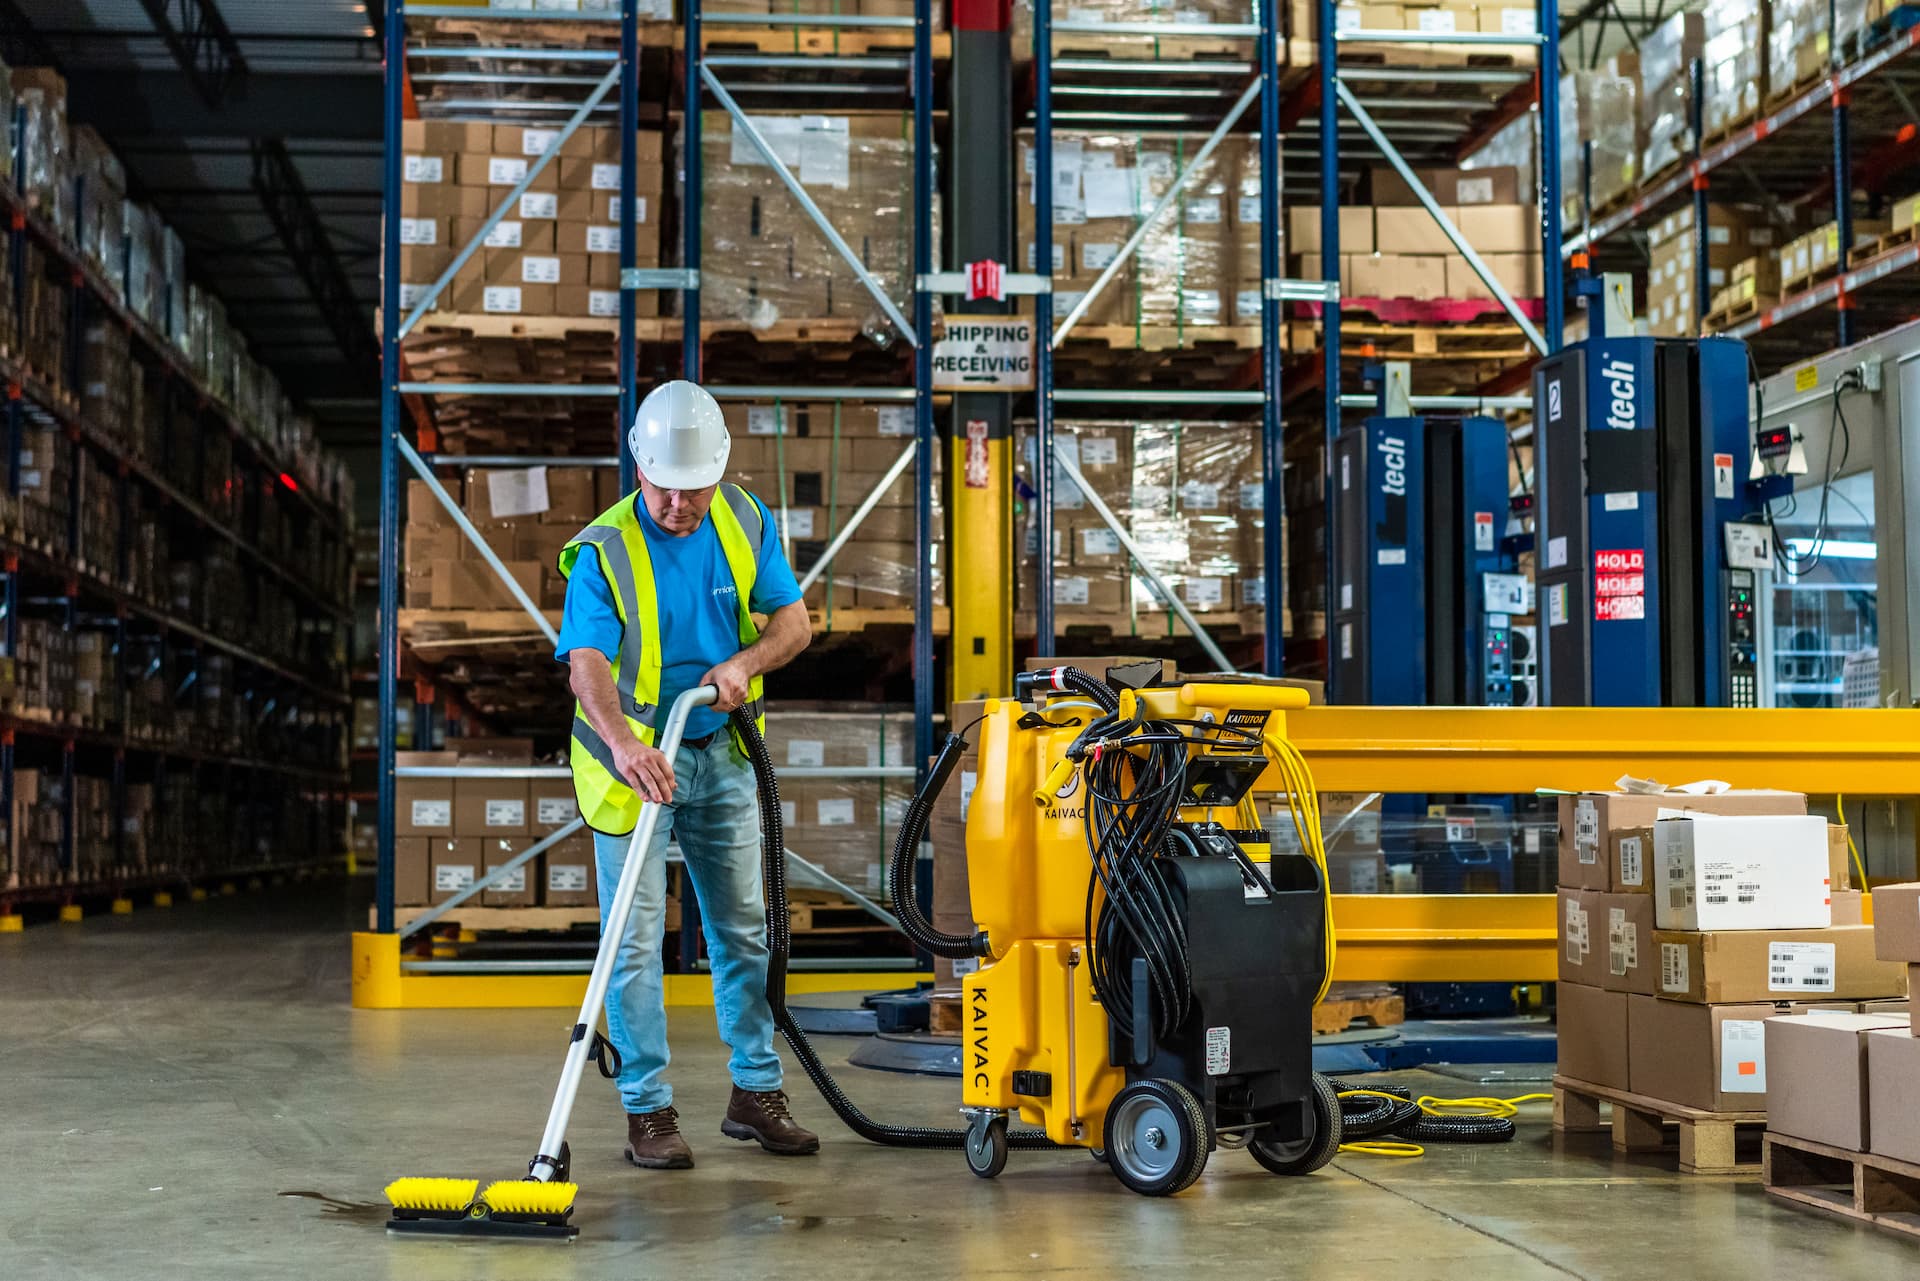 commercial cleaning company providing warehouse cleaning services